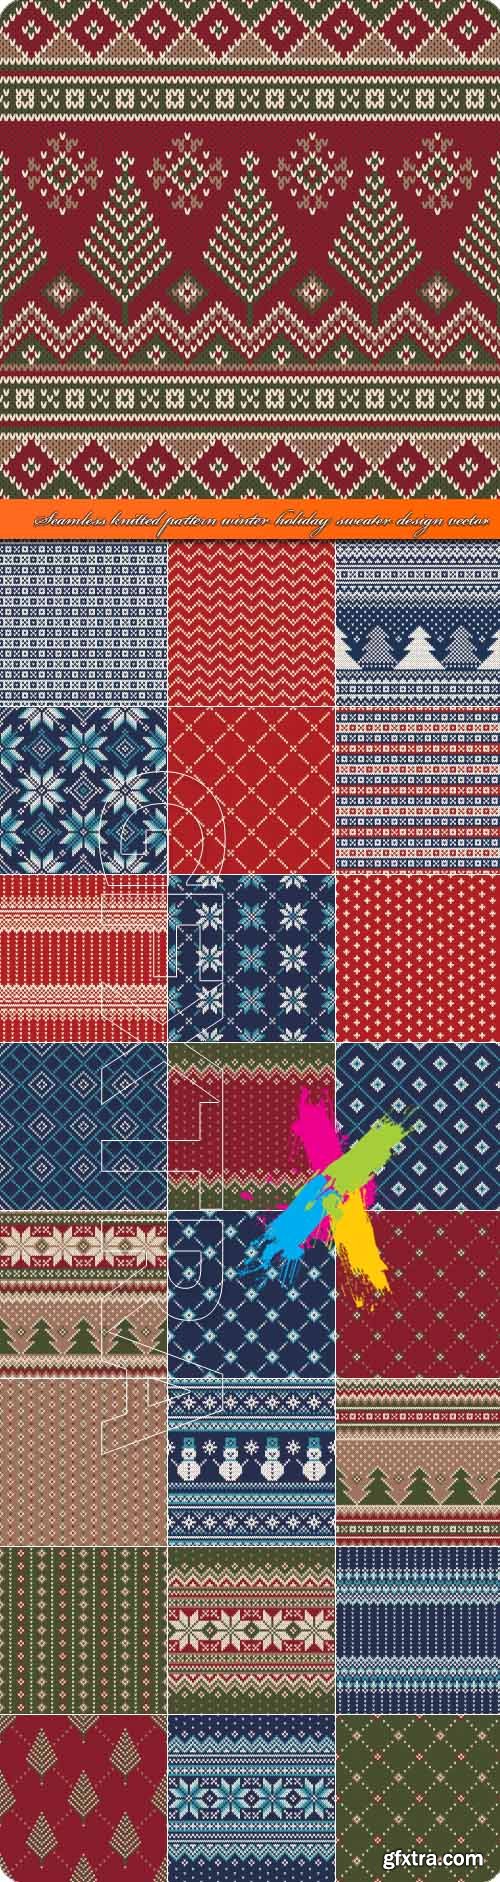 Seamless knitted pattern winter holiday sweater design vector